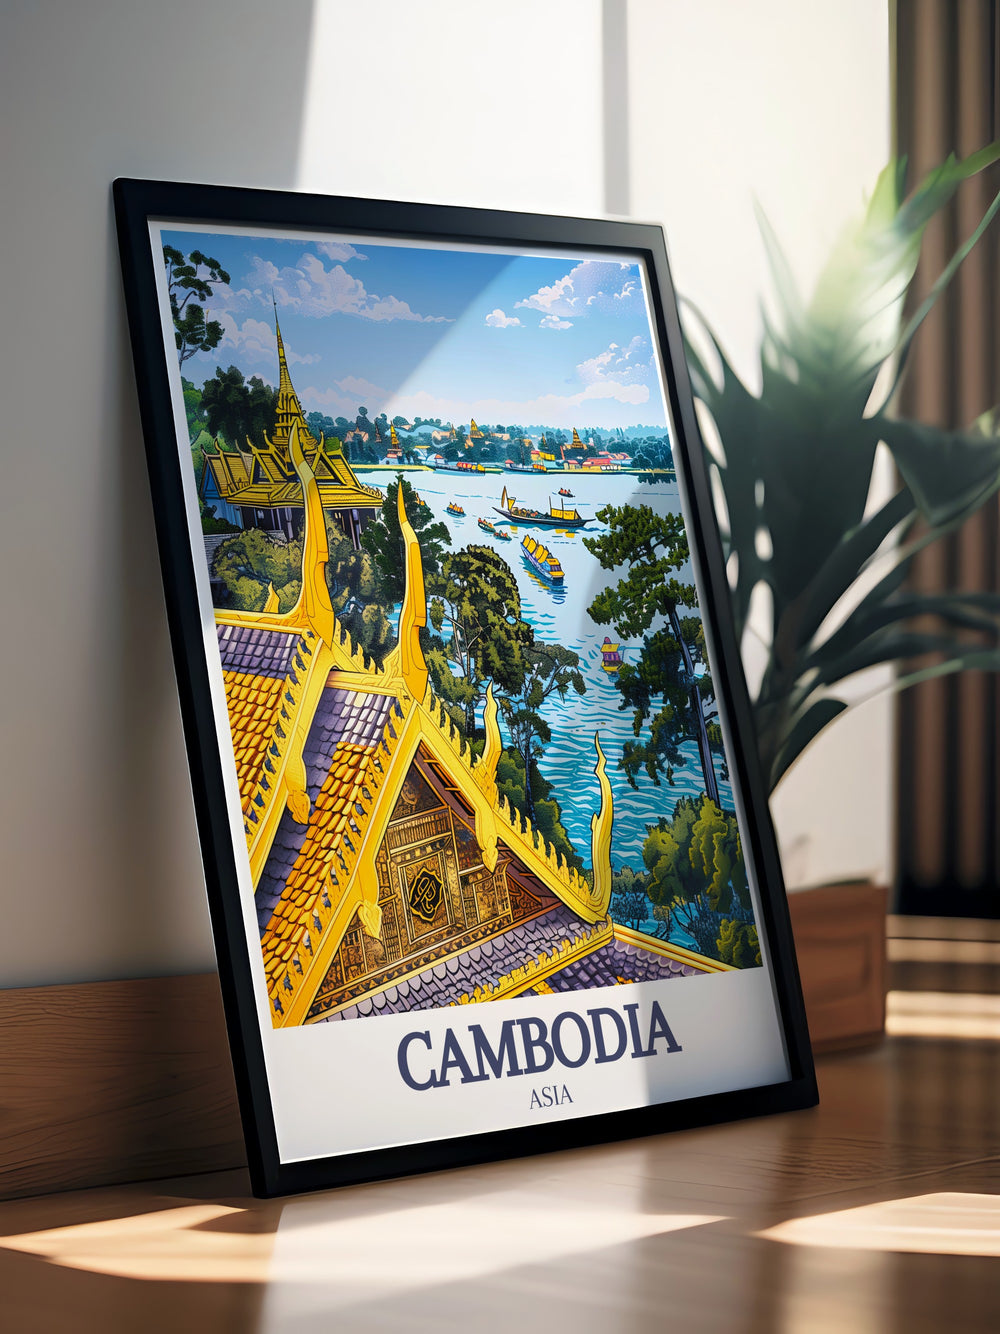 Discover the majestic Royal Palace, Phnom Penh, Tonle Sap Lake with this beautiful wall art. Ideal for those who appreciate Cambodias rich heritage and natural beauty. This artwork captures the elegance of the Royal Palace and the tranquility of Tonle Sap Lake.